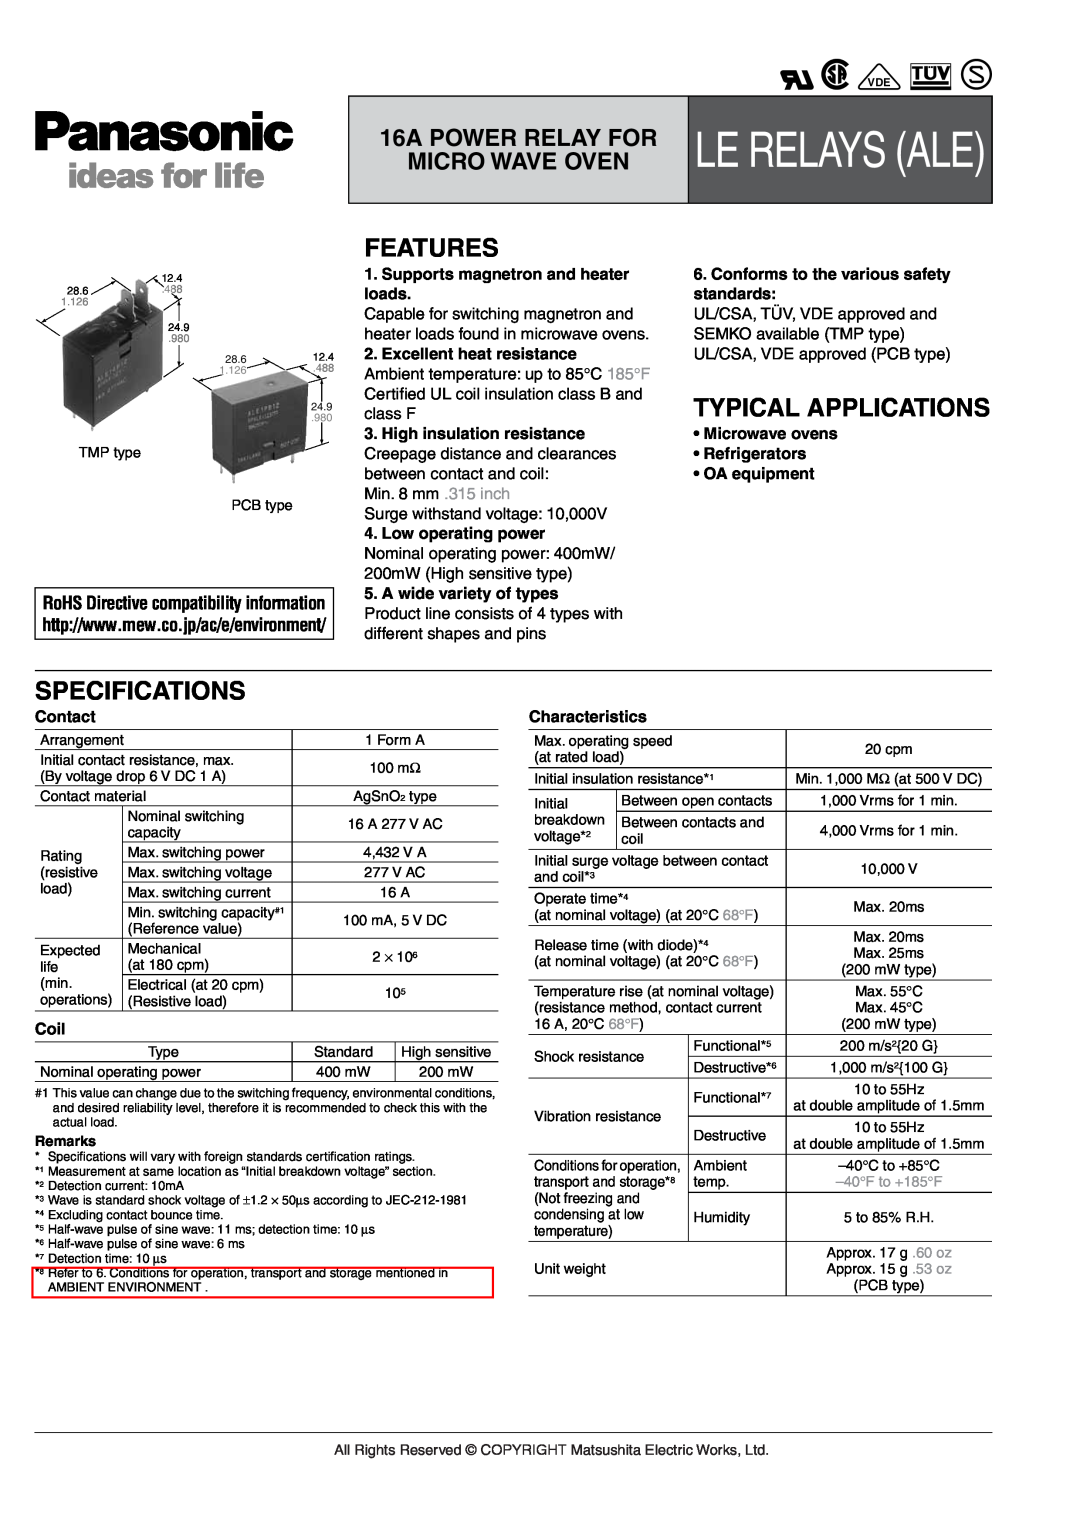 Panasonic LE Relays specifications Le Ale, Features, Specifications, Le Relays Ale, Typical Applications, Micro Wave Oven 